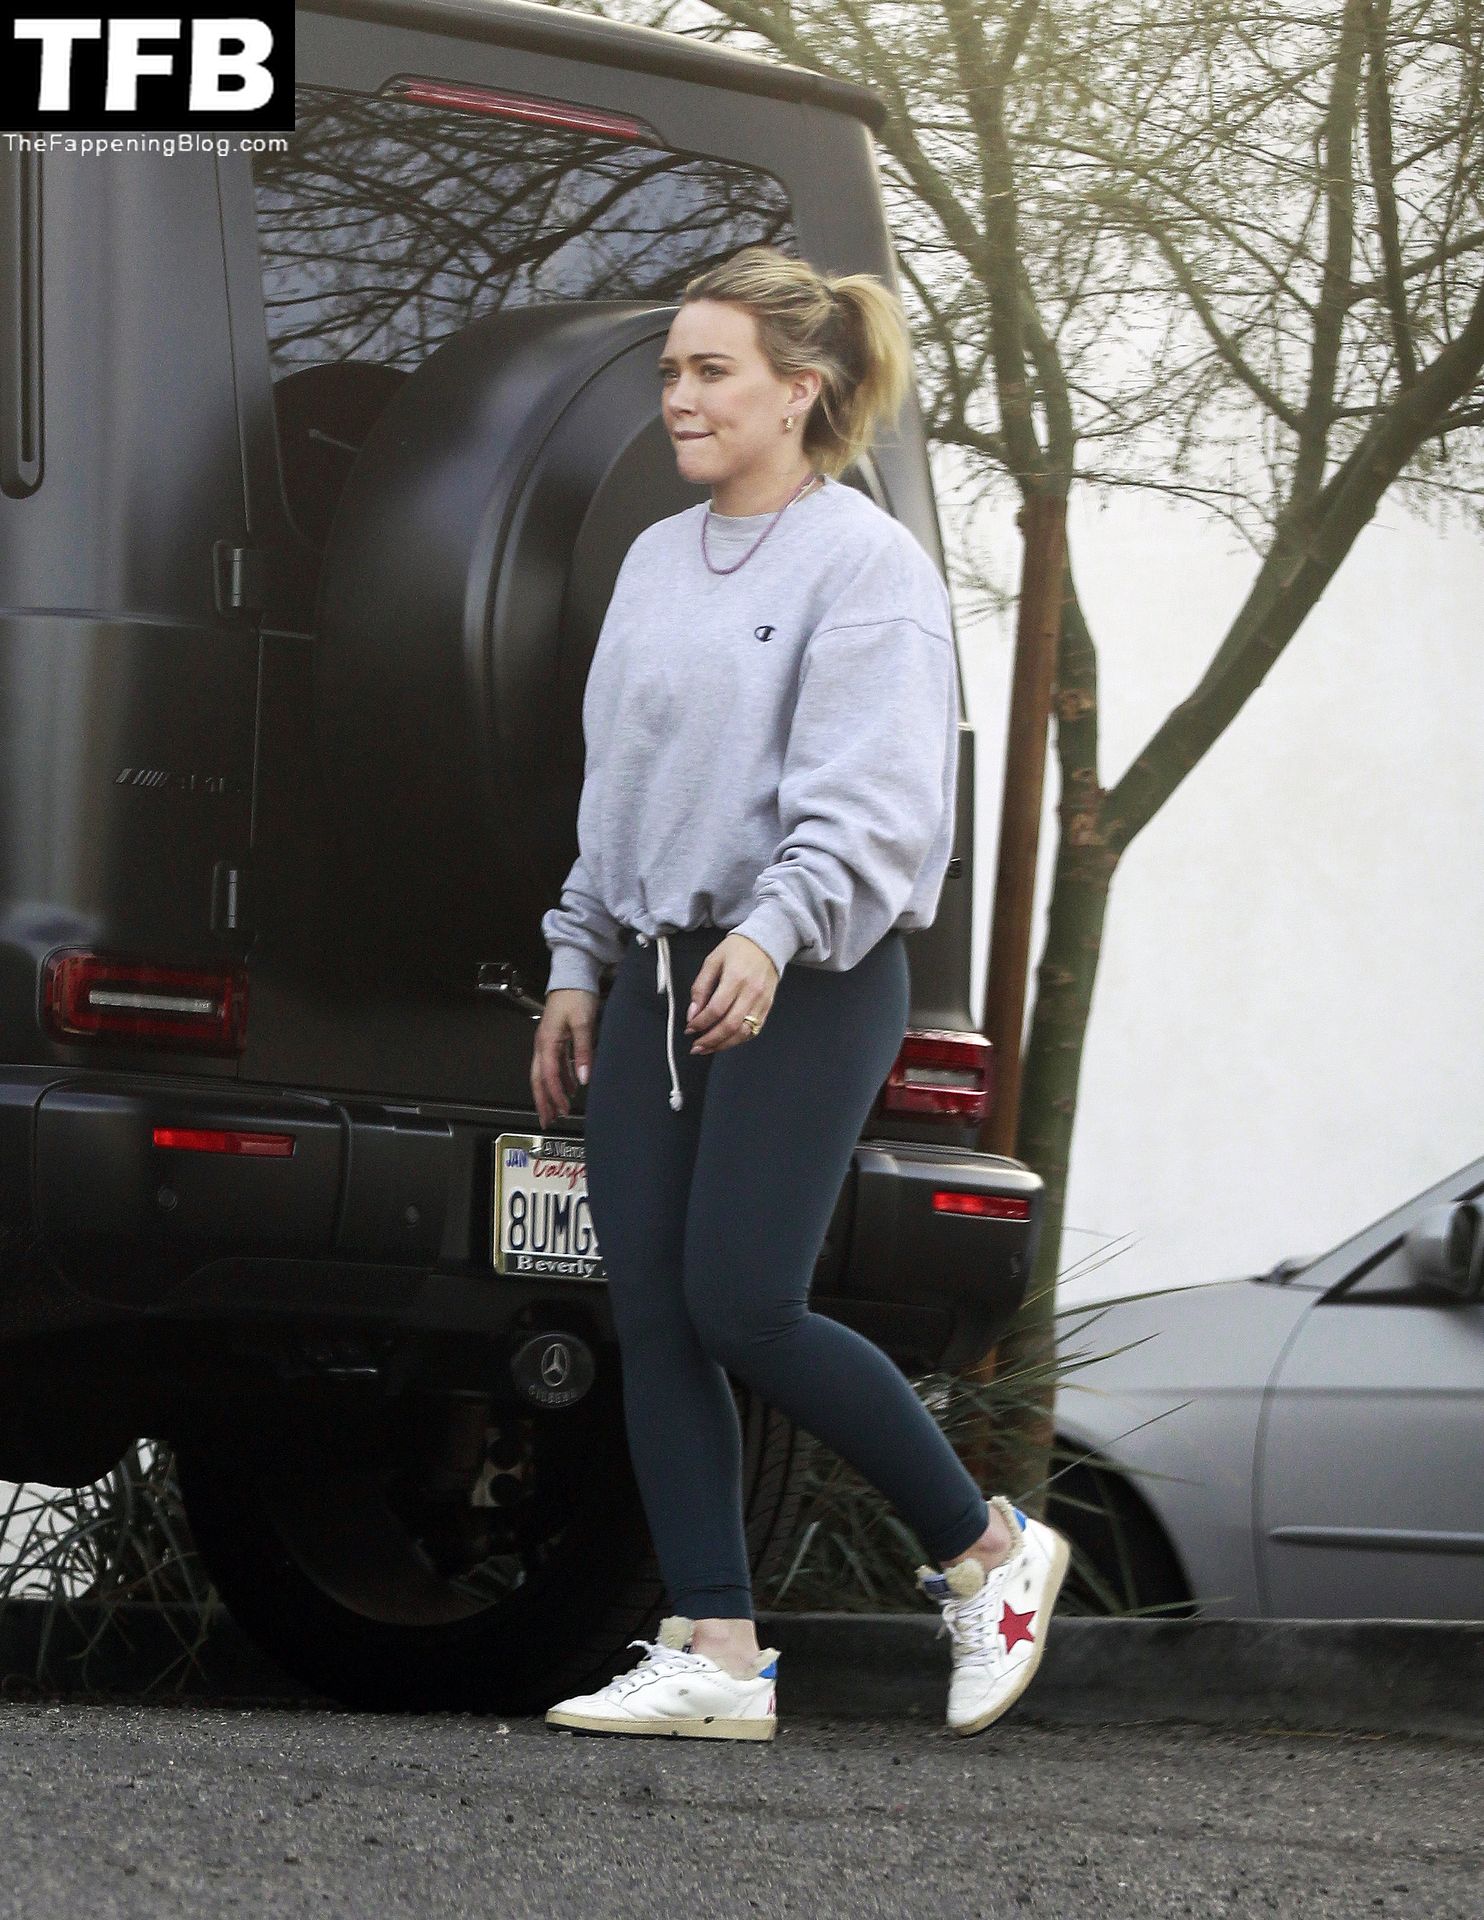 Hilary-Duff-shows-off-impressive-gym-results-in-a-pair-of-skintight-leggings-during-LA-errand-run...-one-day-after-hosting-quaint-Thanksgiving-gathering-at-her-home-The-Fappening-Blog-3.jpg